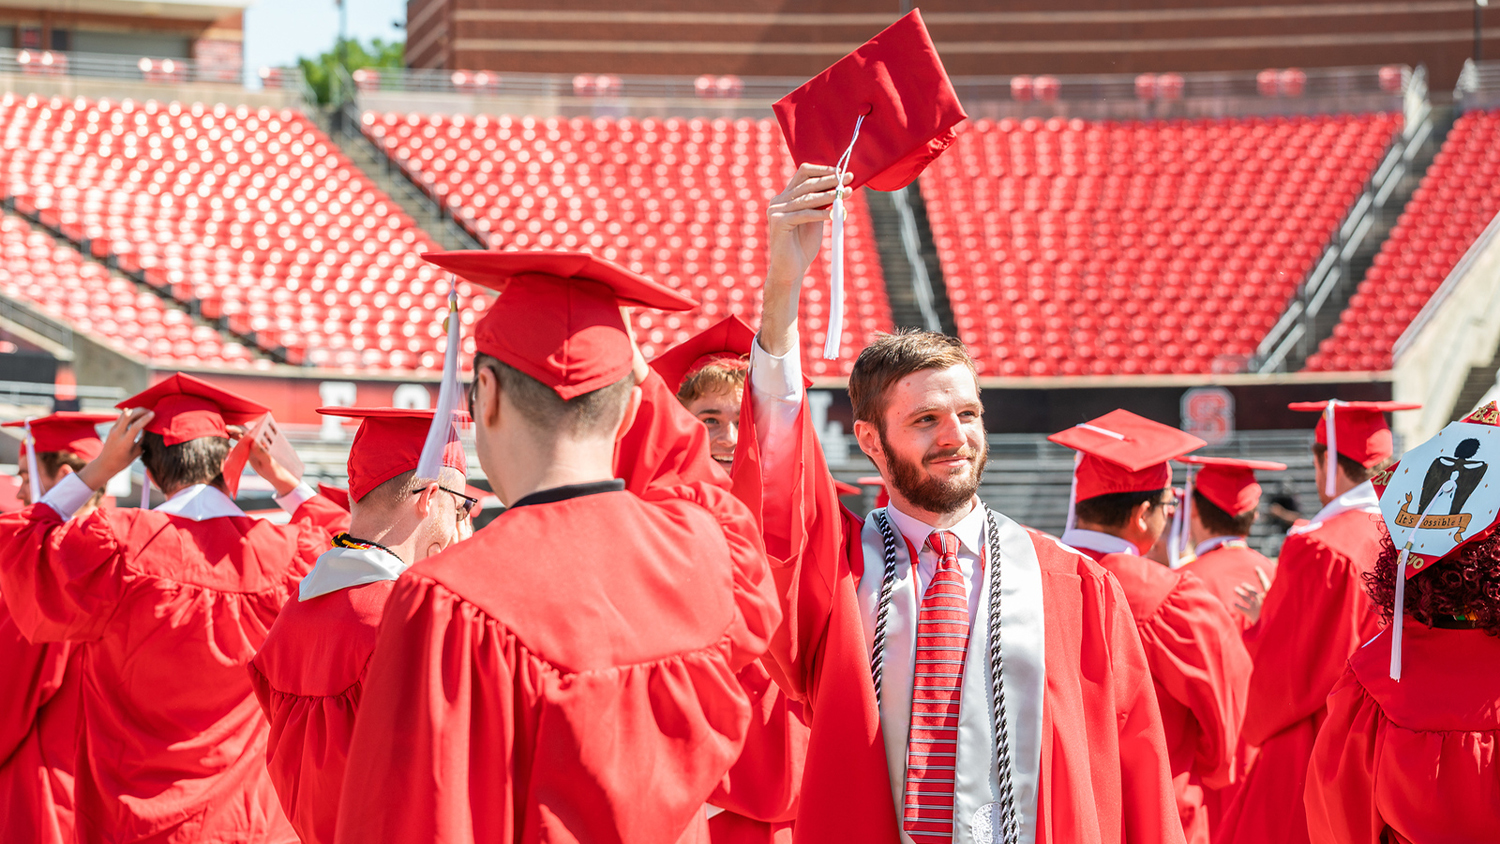 Among several graduates in red robes and hats, one male graduate holds his hat up in the air and smiles